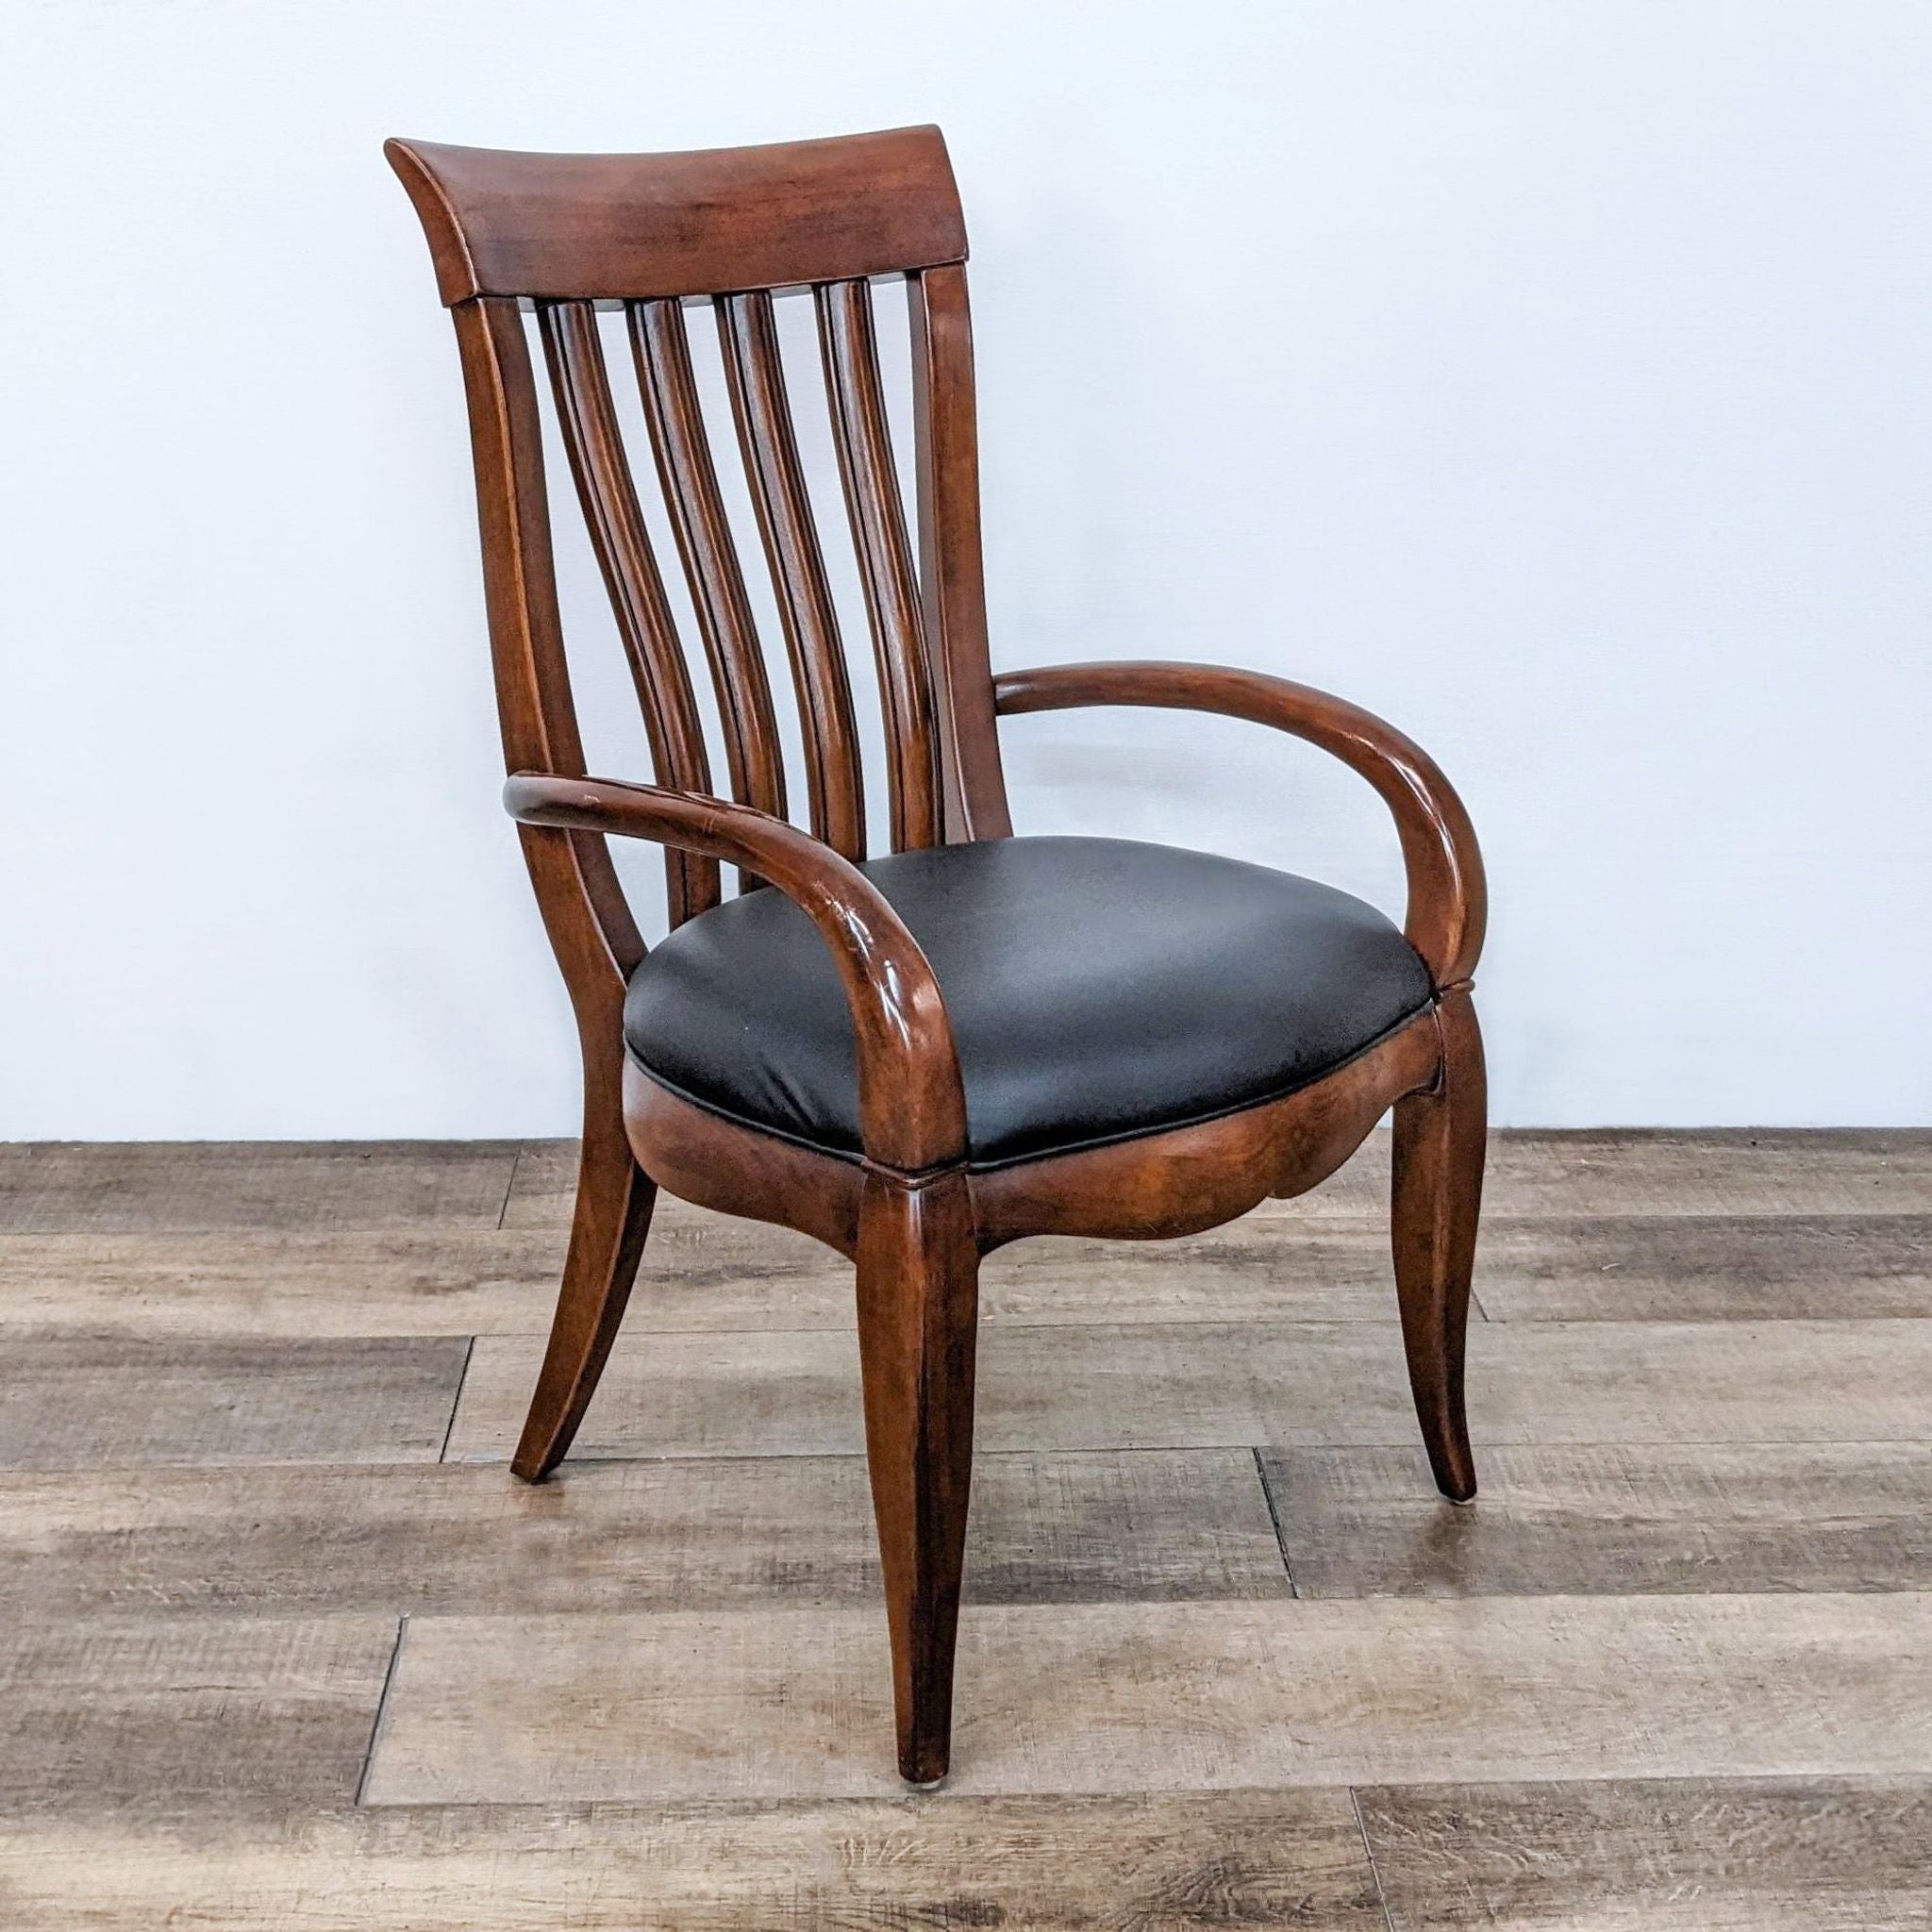 Bernhardt dining chair with vertical slat back design and black leather seat.